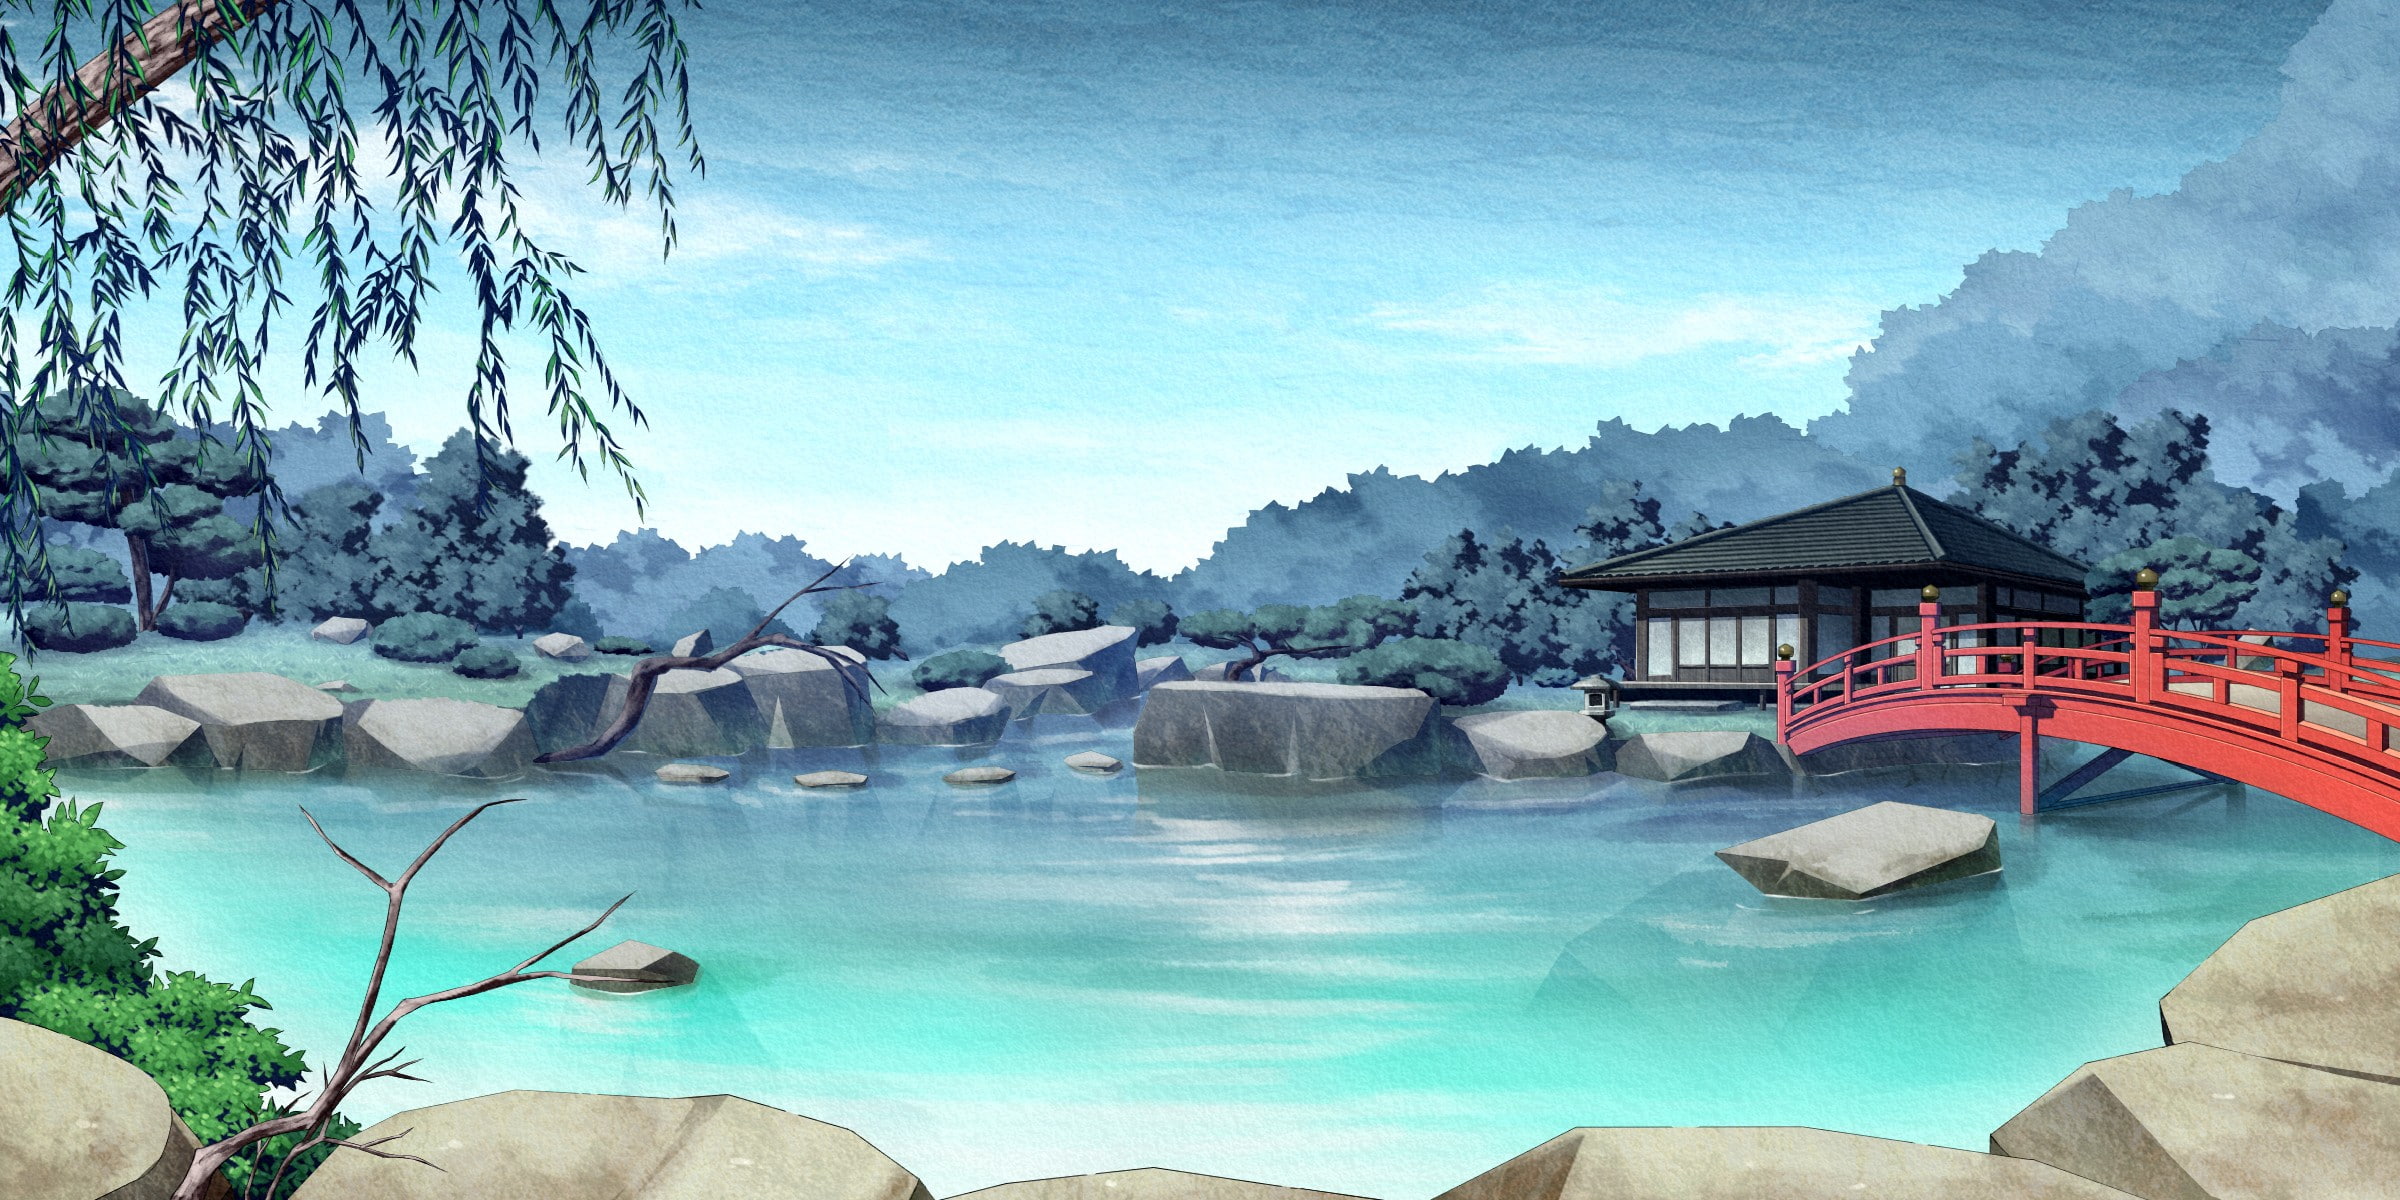 anime, landscape, nature, peace, peaceful, water, rock, beauty in nature